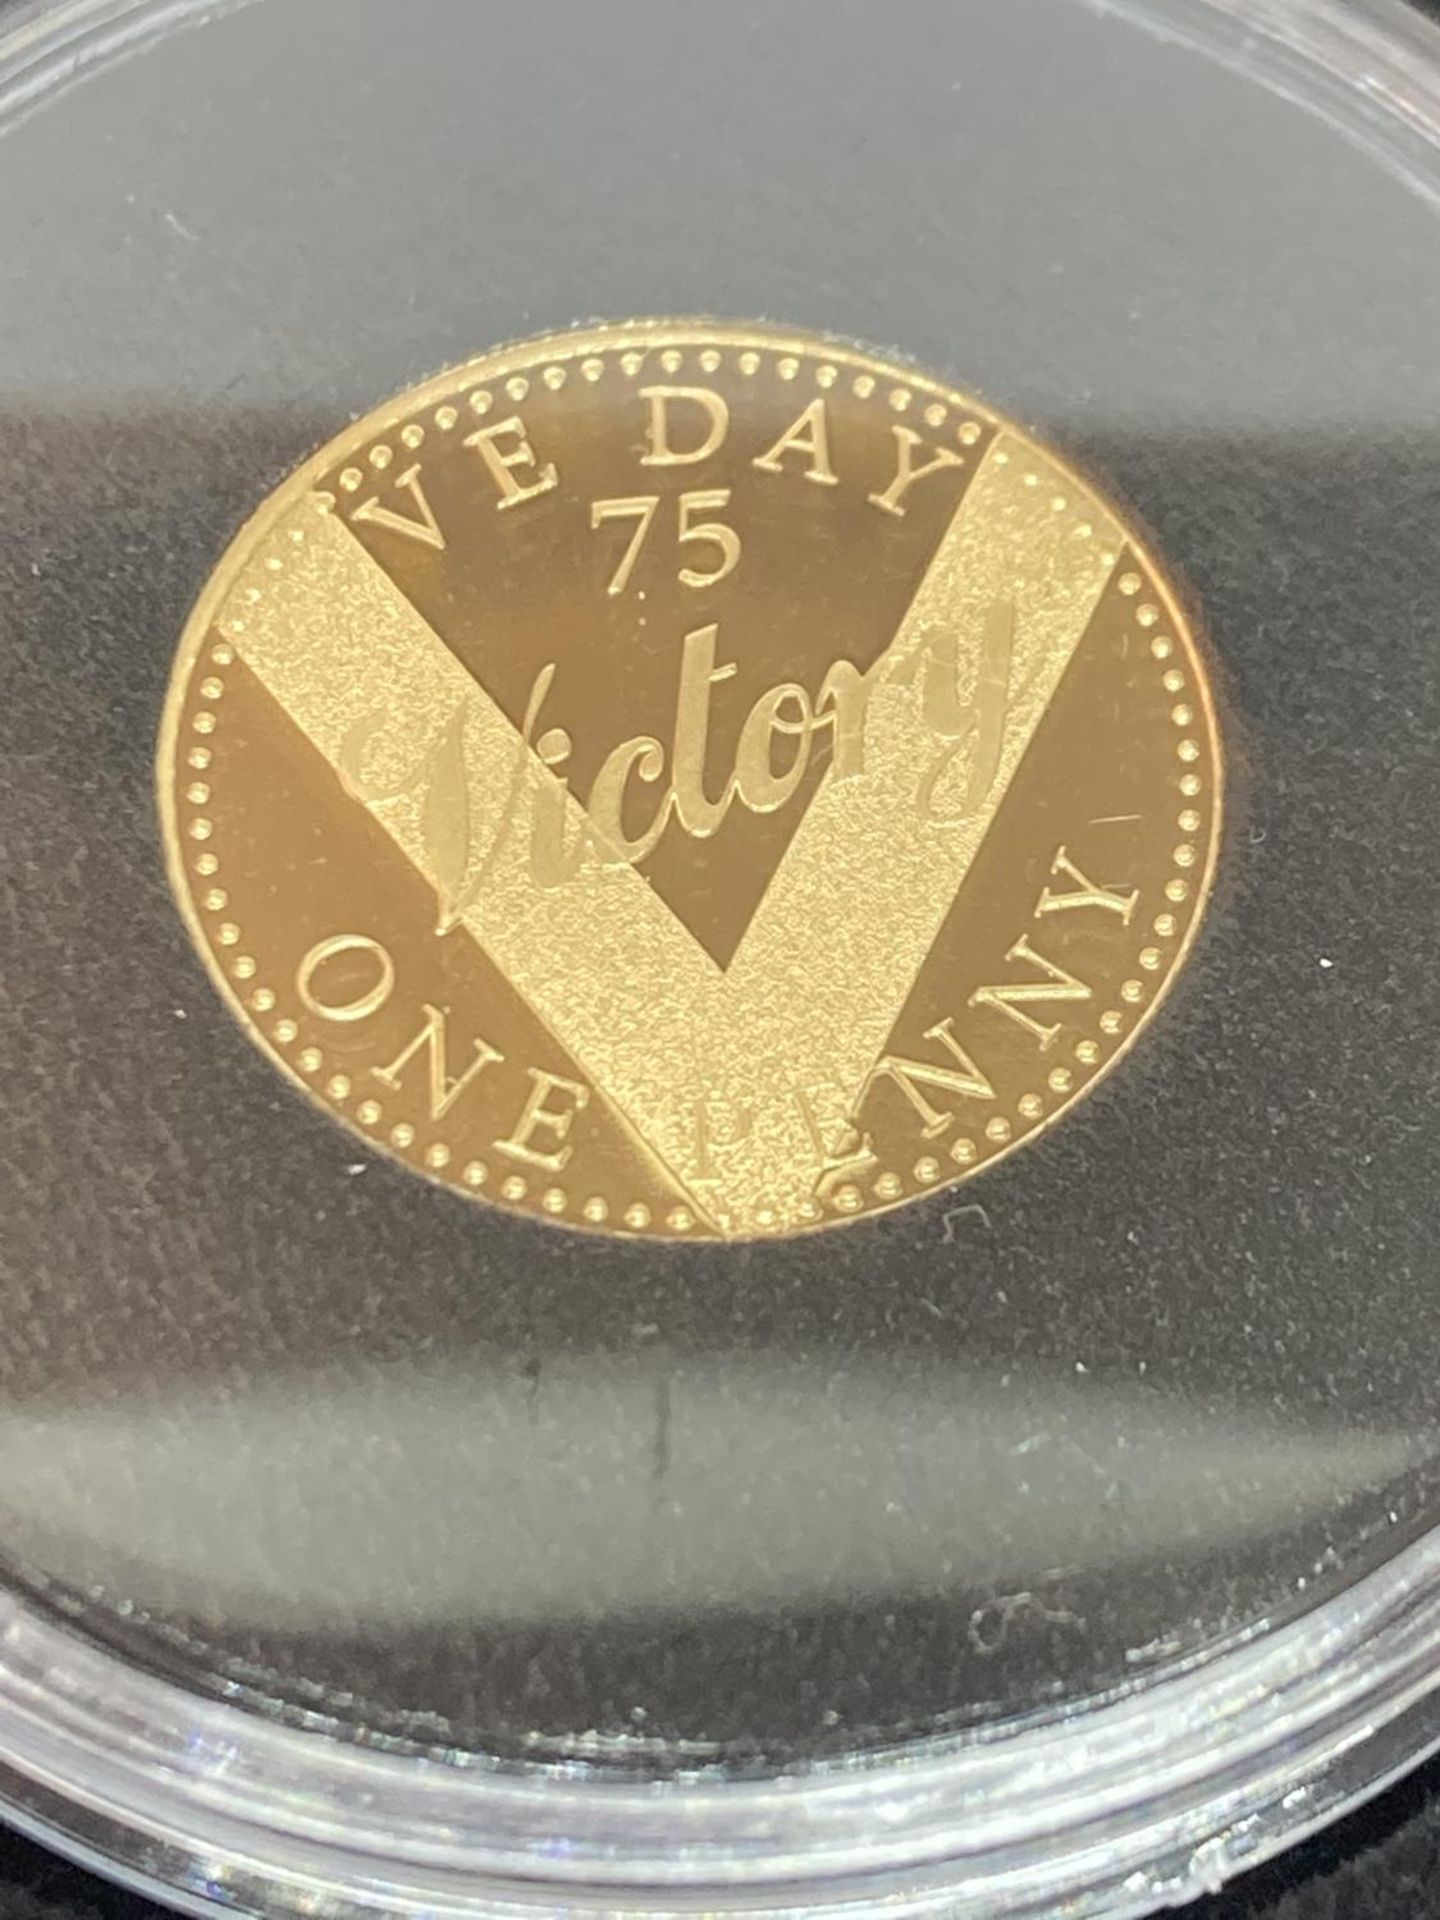 A 75TH ANNIVERSARY OF VE DAY GOLD PROOF JERSEY PENNY GROSS WEIGHT 4.0 GRAMS - Image 2 of 4